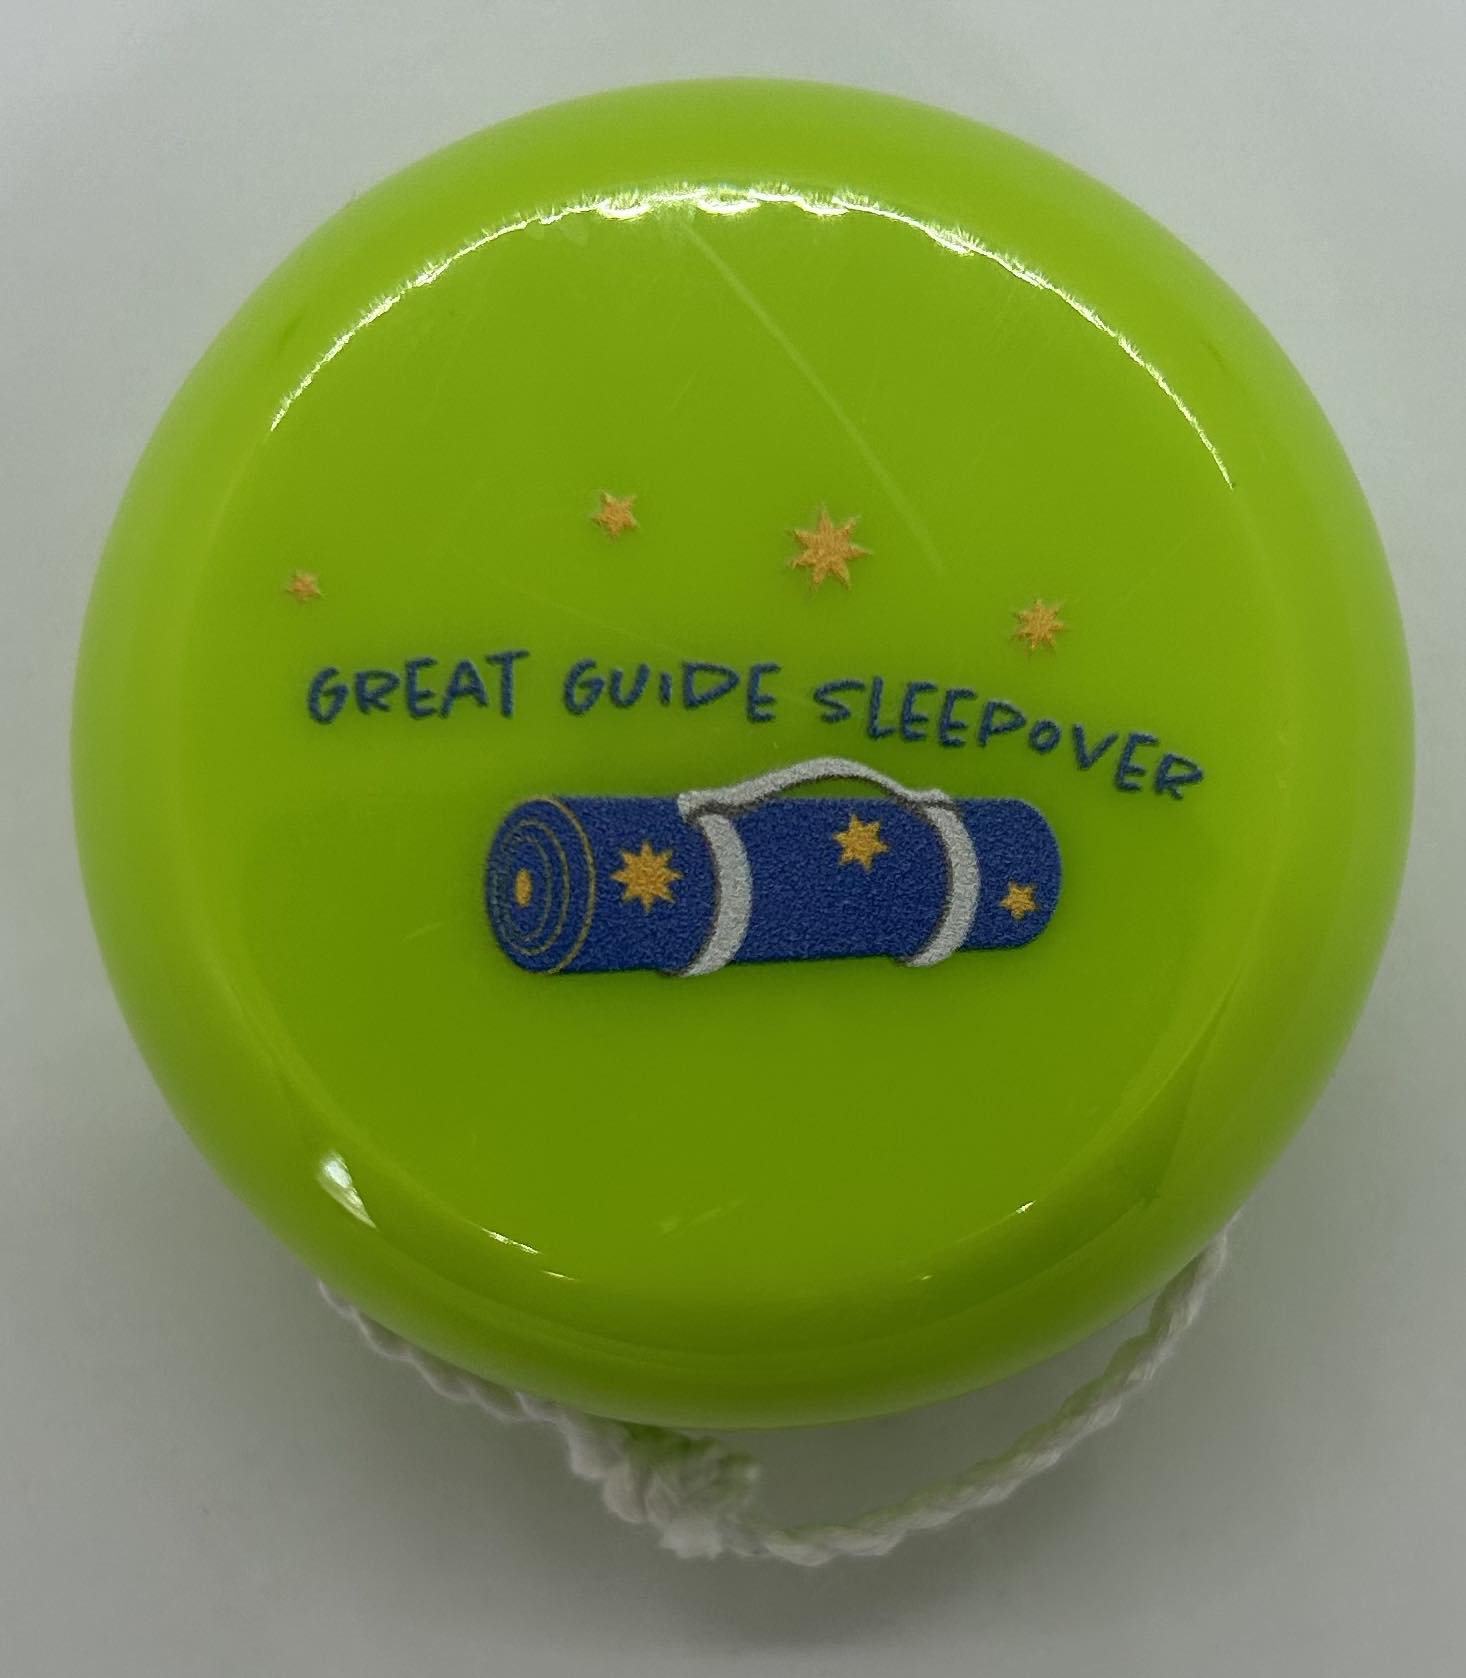 a green plastic yoyo with grey guide sleepover and logo on the front